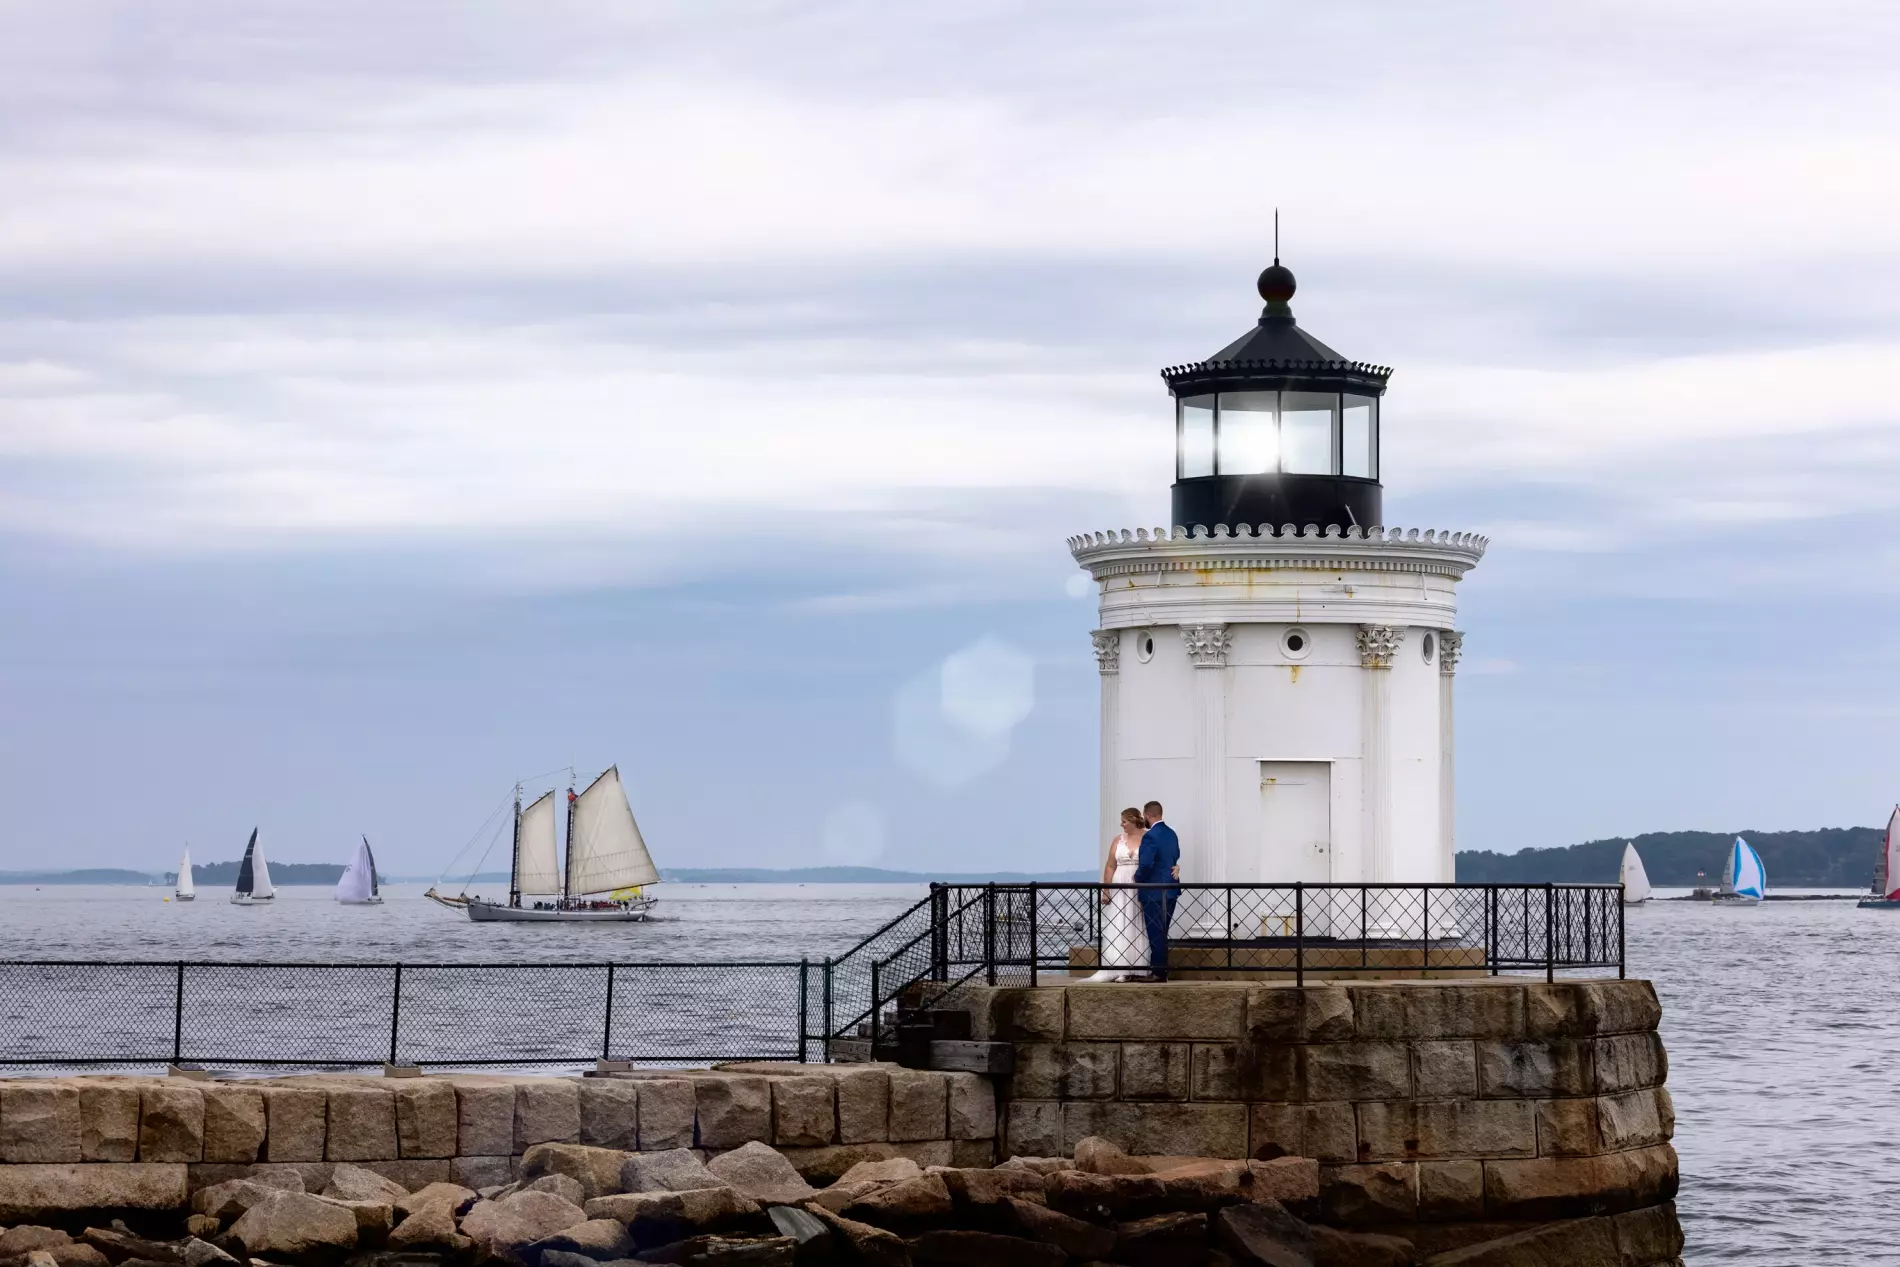 wedding pictures from rhode island, boston, new hampshire, and maine